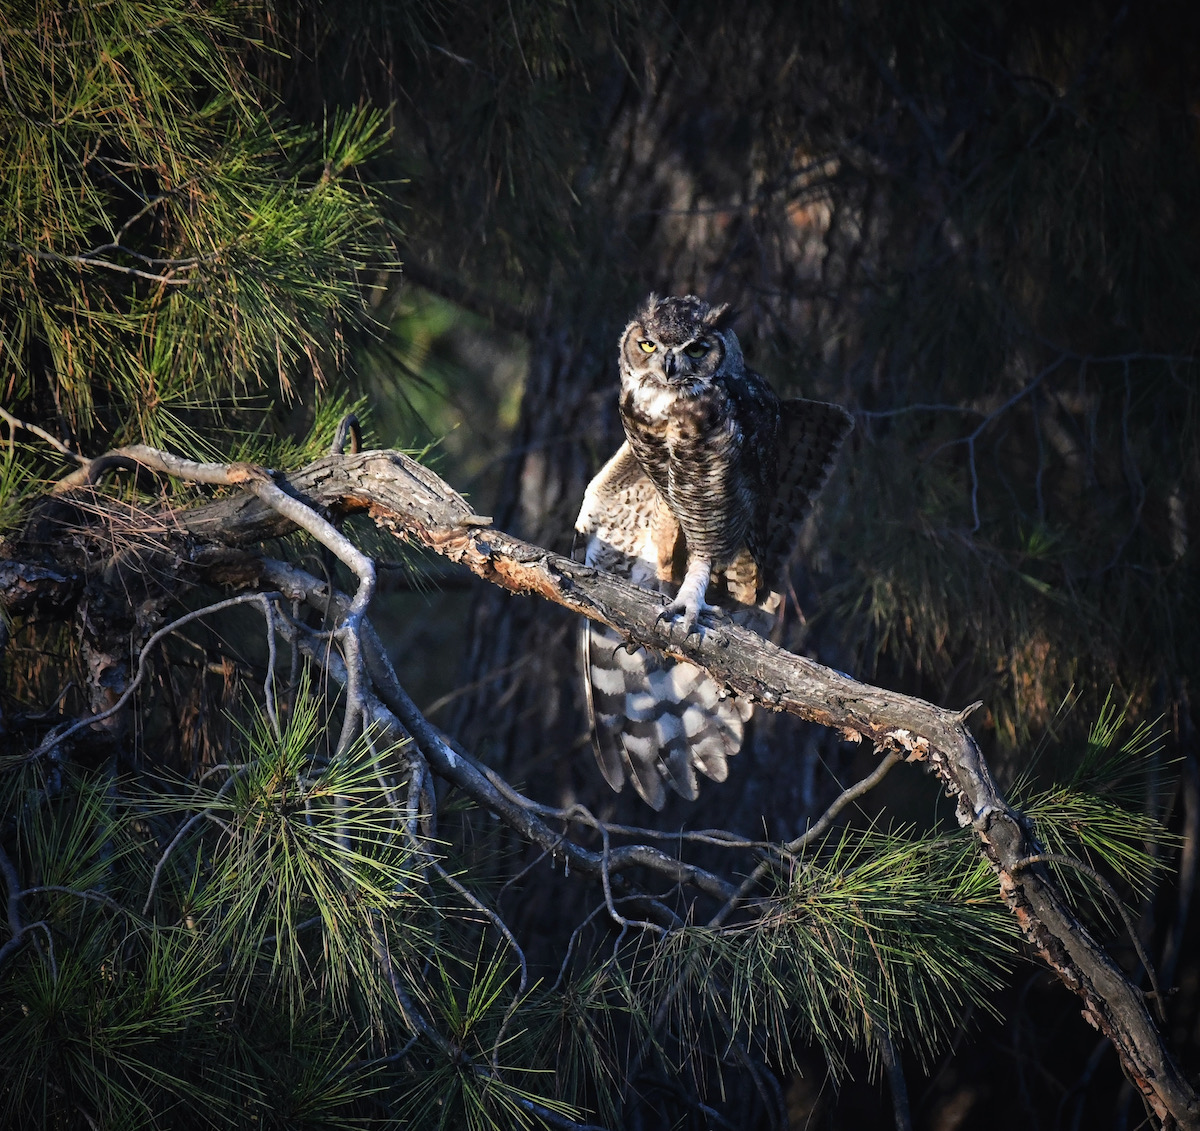 Great Horned Owl, Los Angeles. Photo by Caleb Peterson